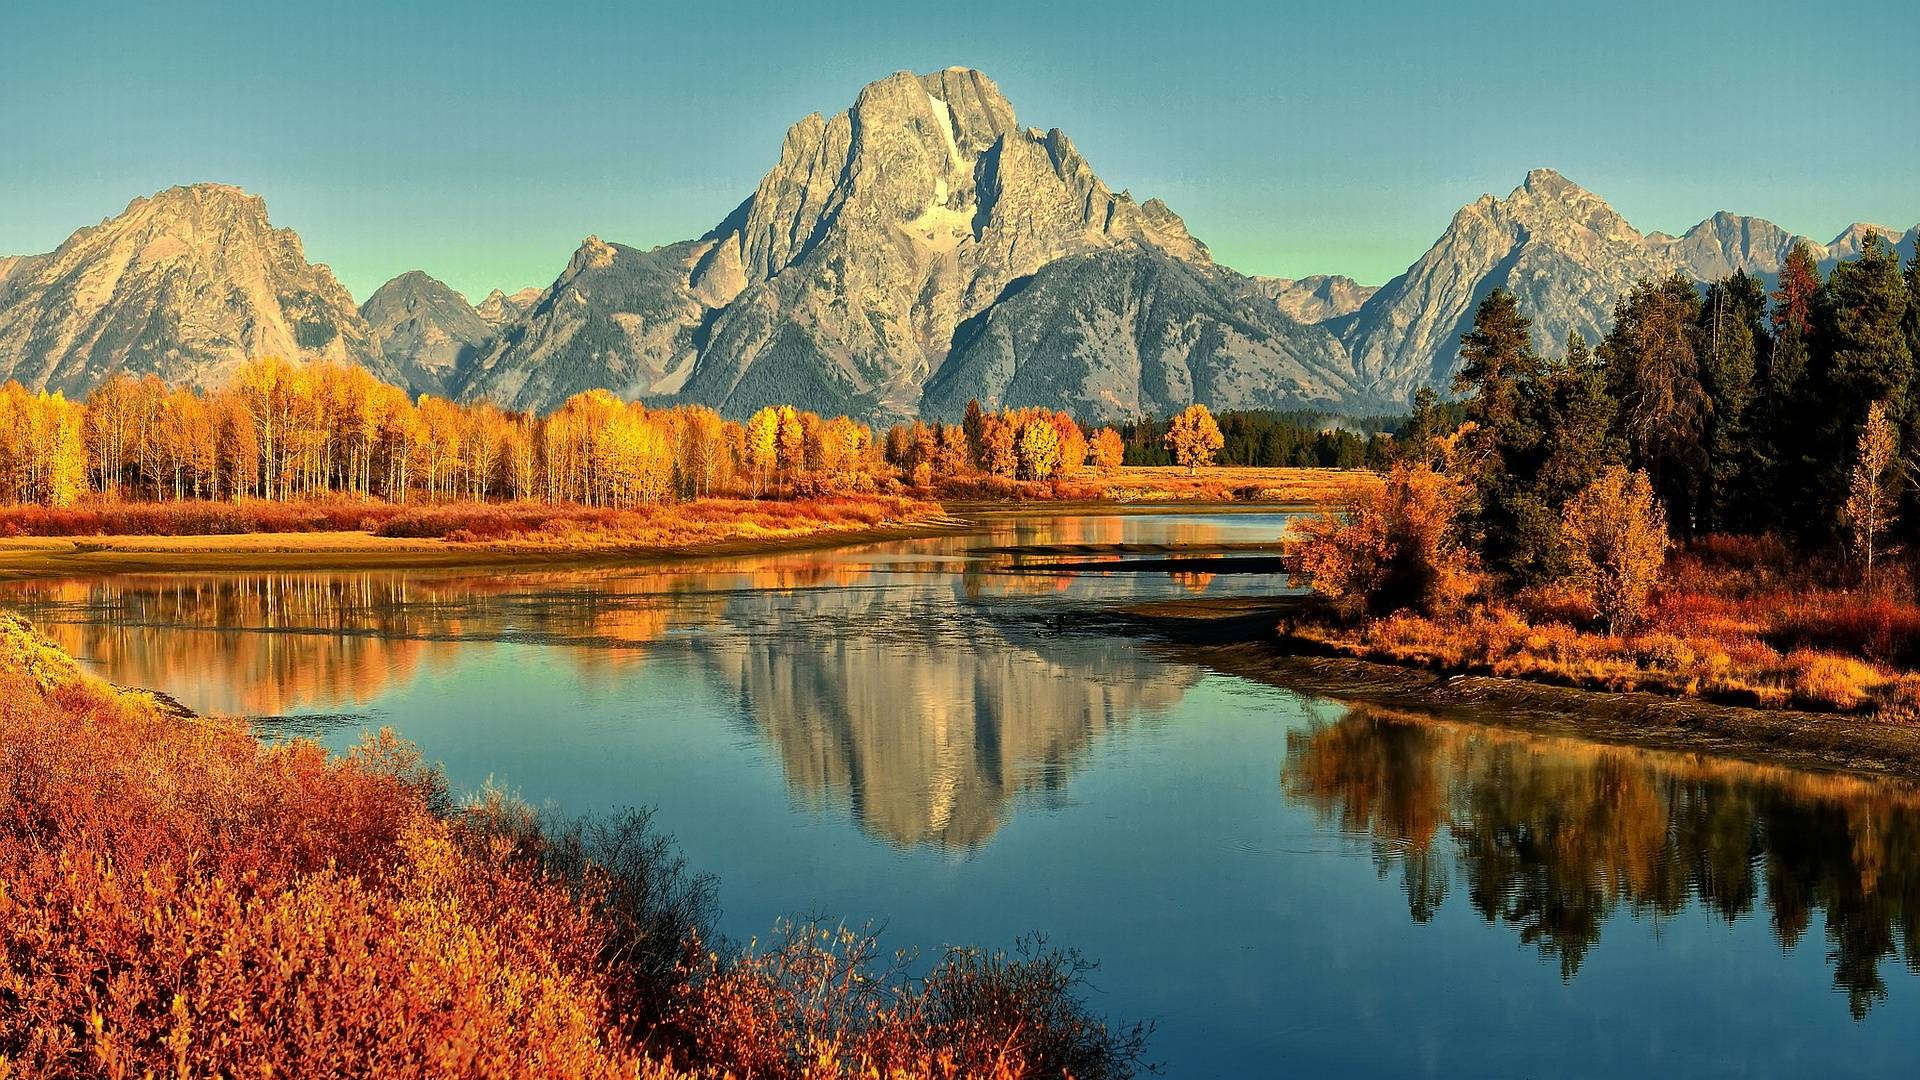 General 1920x1080 nature landscape mountains water river reflection fall